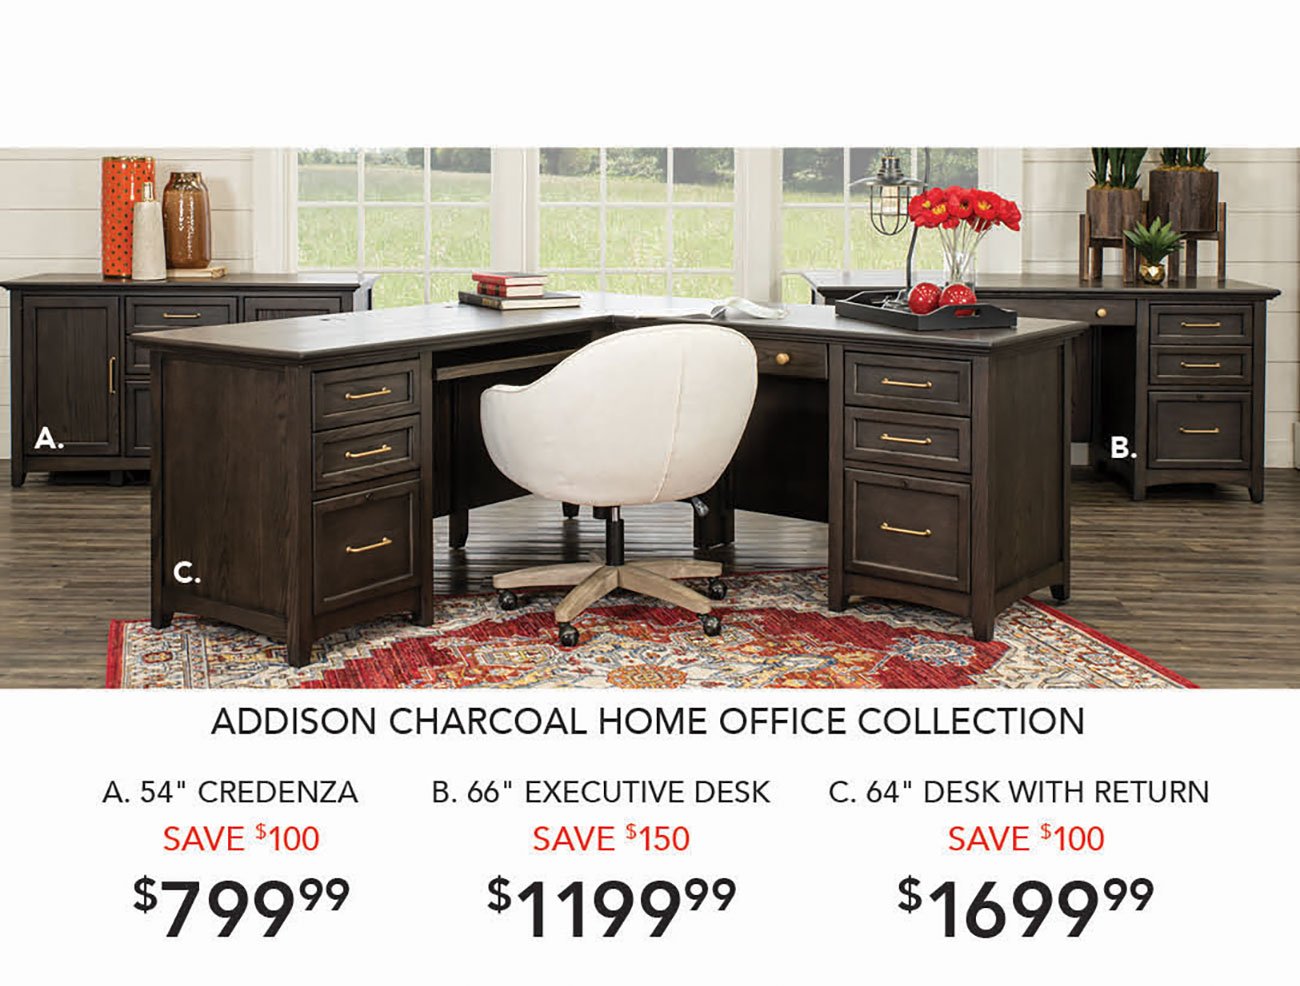 Addison-Charcoal-Home-Office-Collection